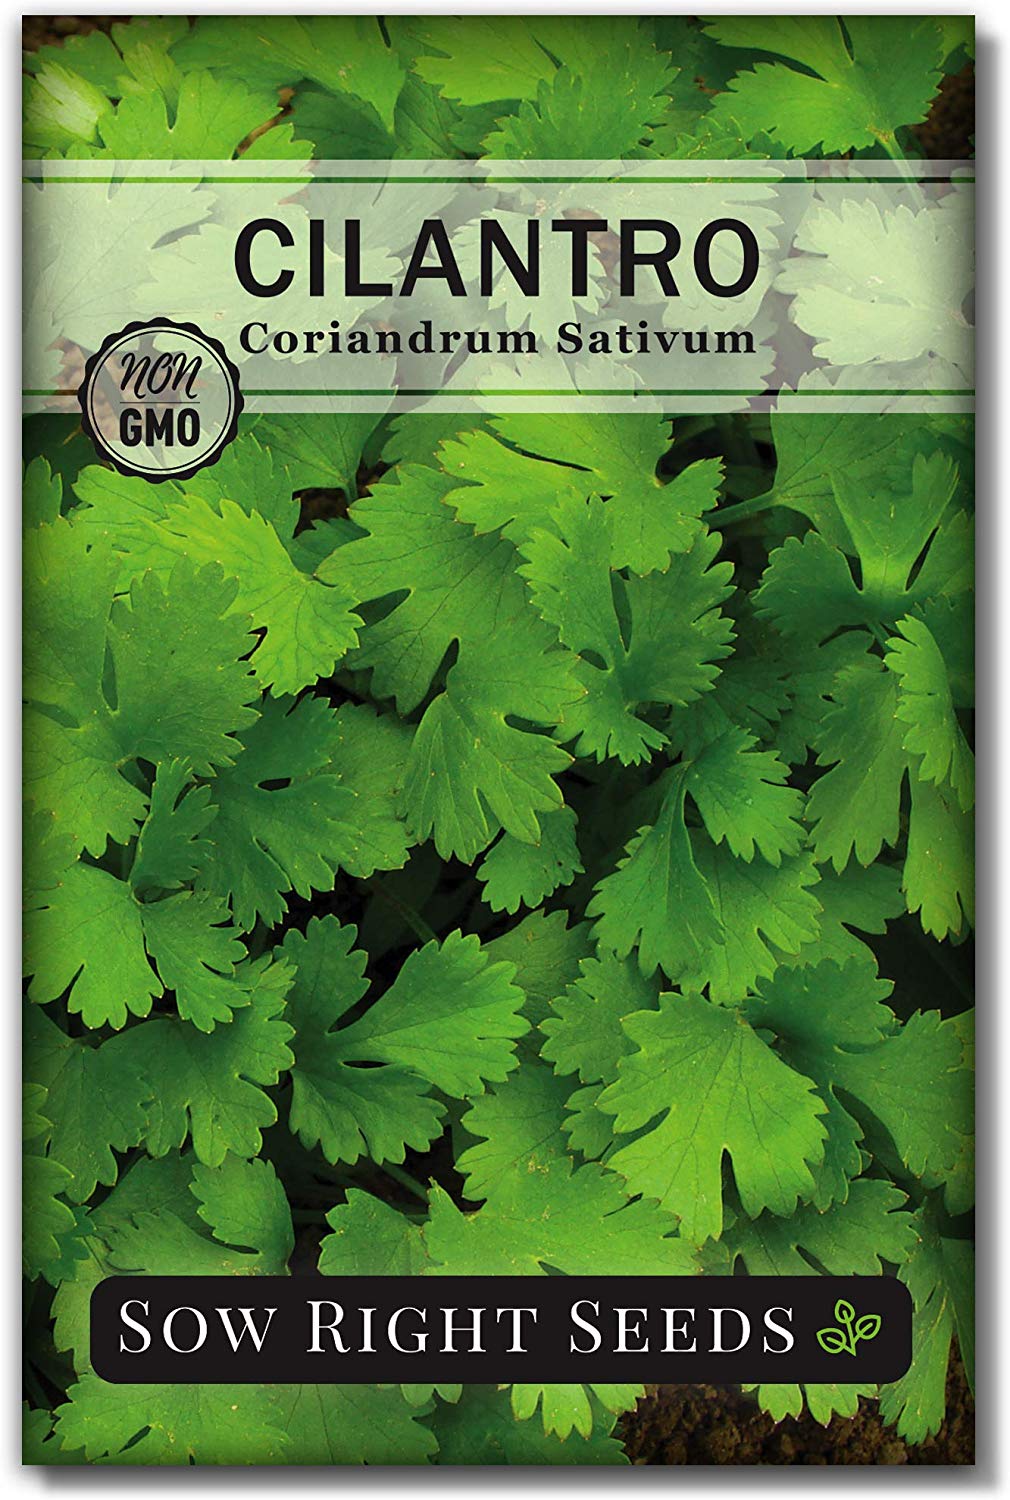 Sow Right Seeds - Cilantro Seed - Non-GMO Heirloom Seeds with Full Instructions for Planting